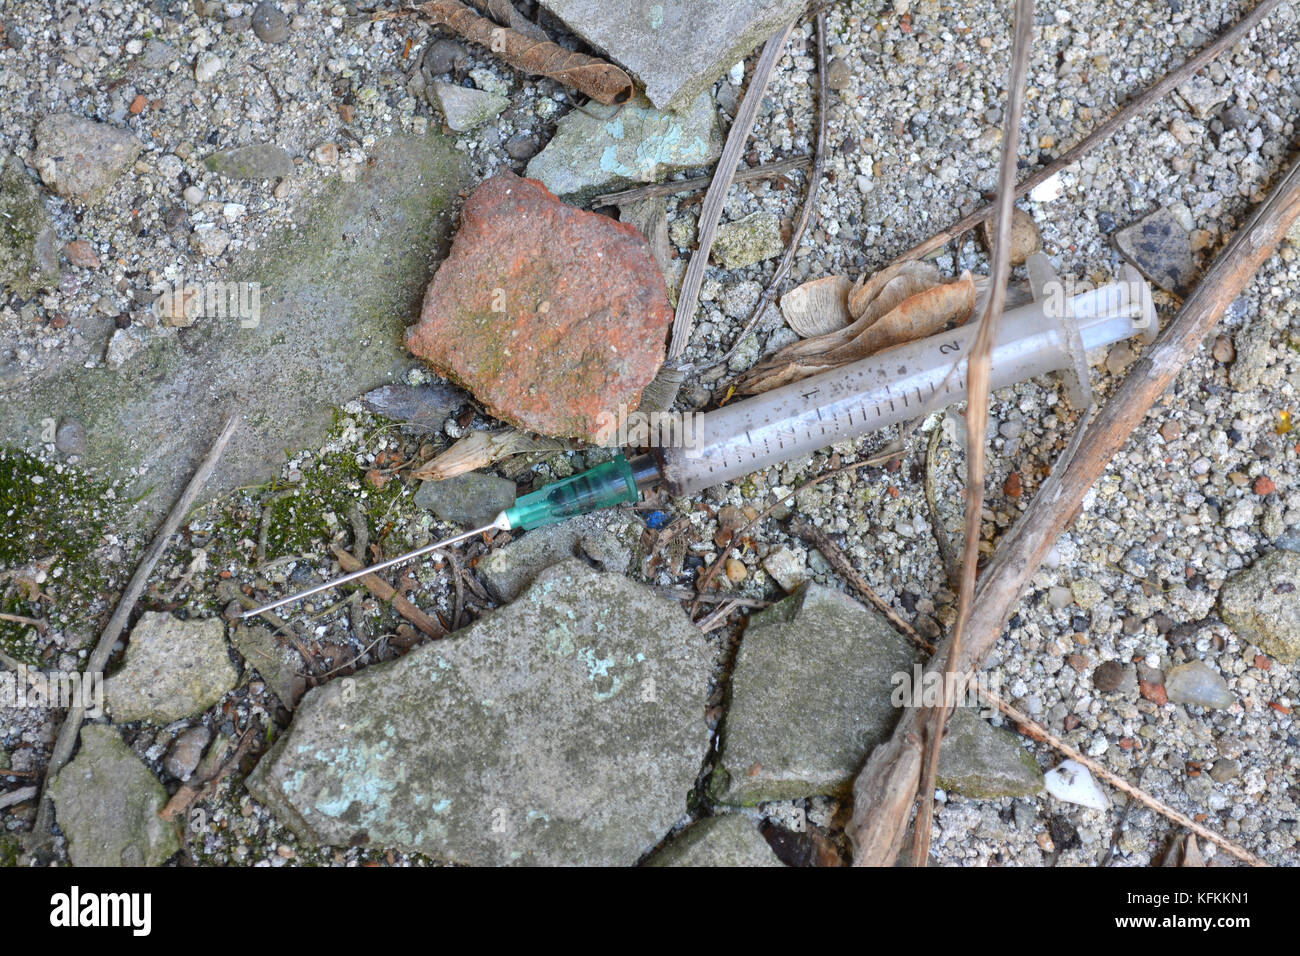 Discarded syringe and on ground used by heroin addict. Stock Photo